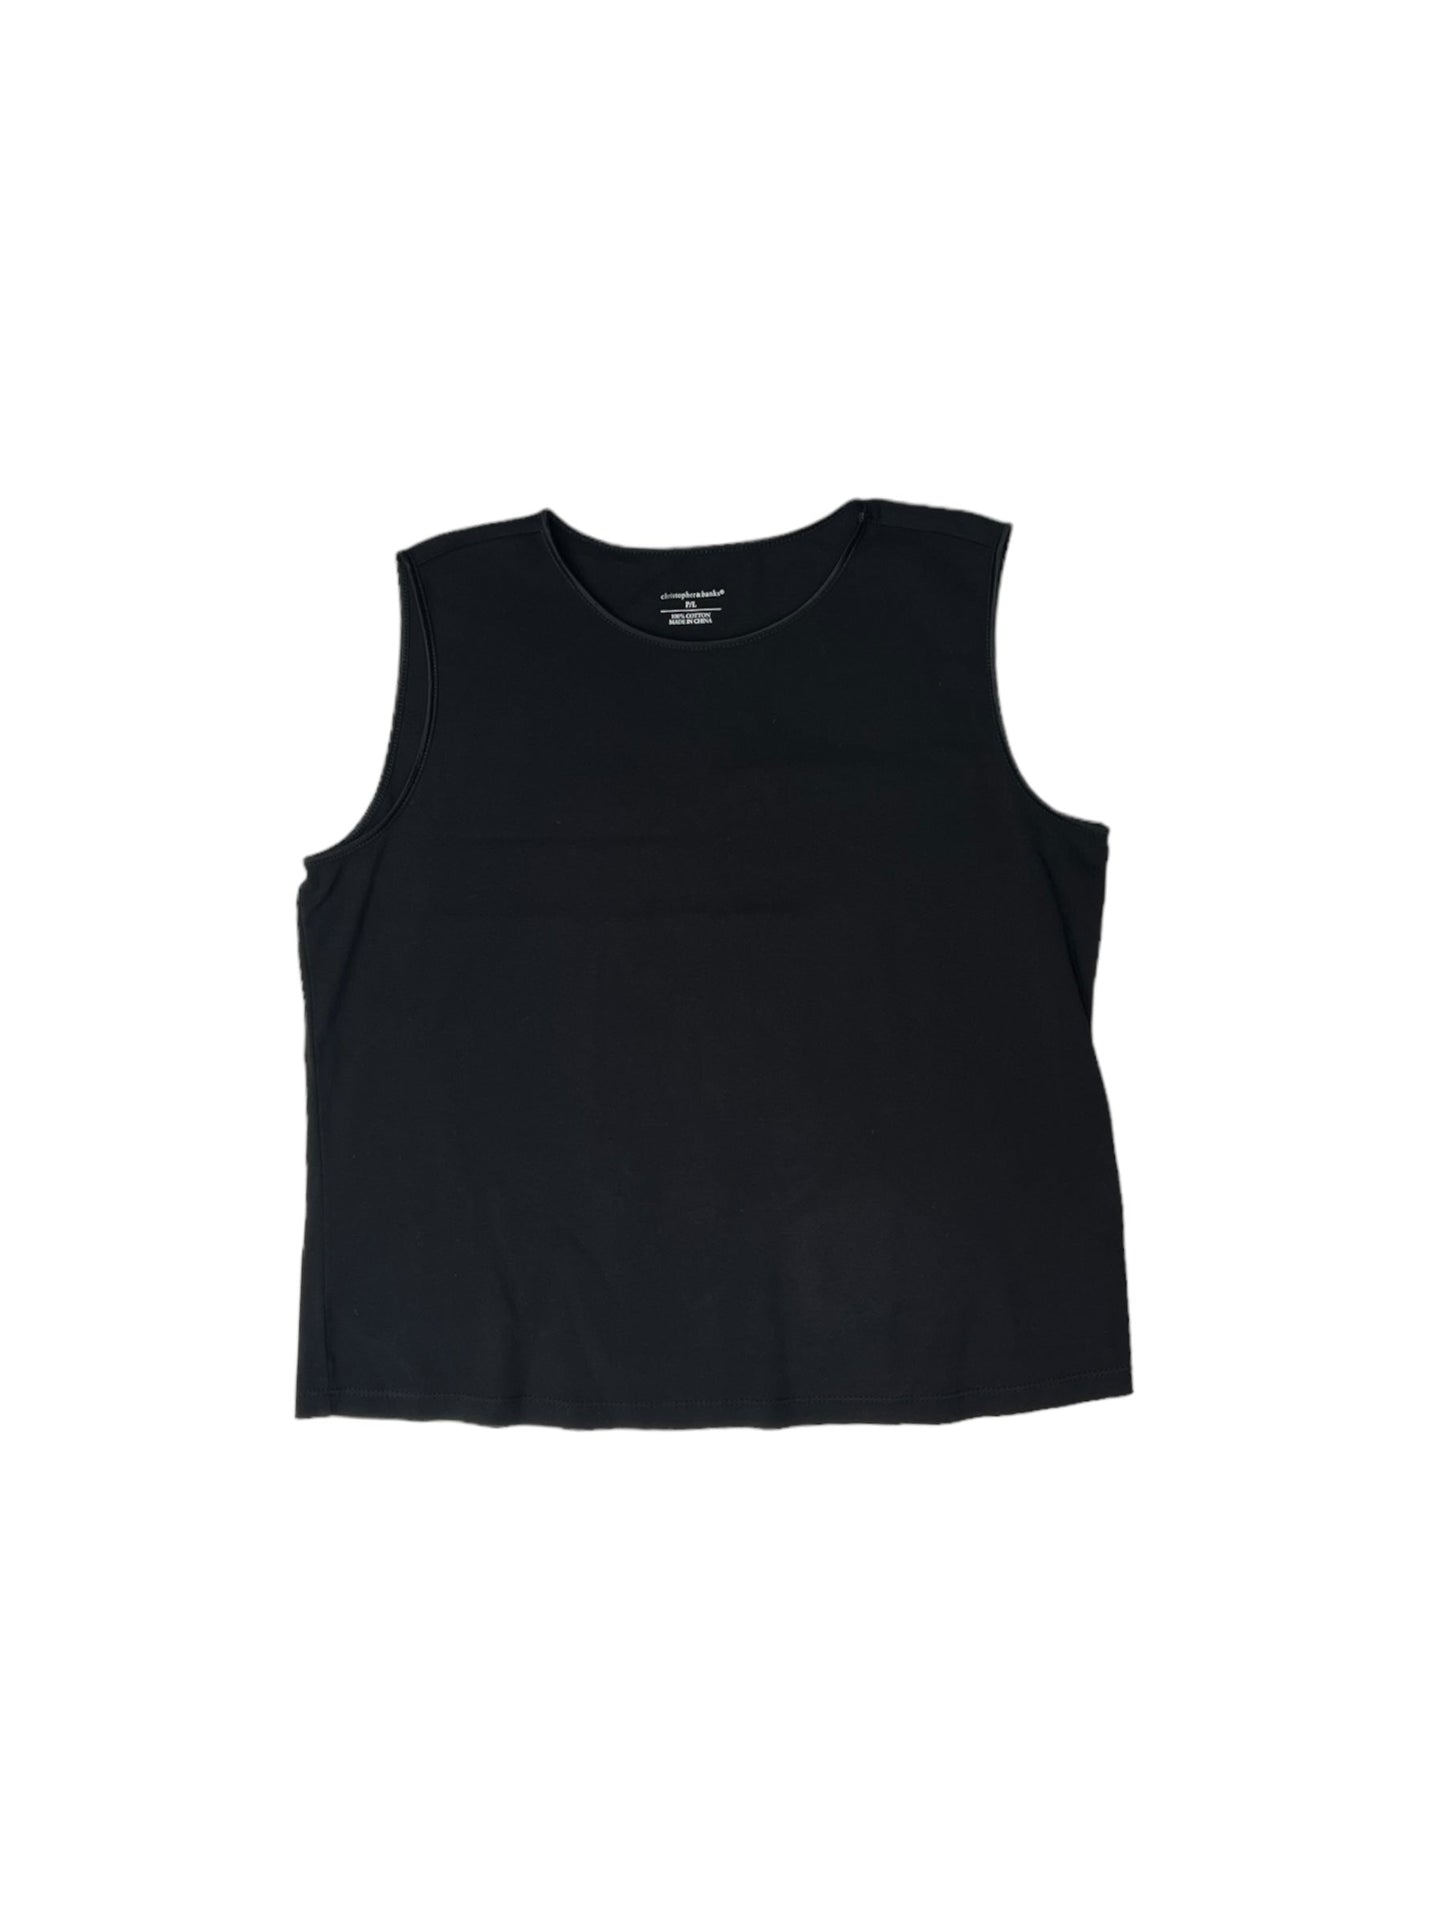 Black Top Sleeveless Christopher And Banks, Size L